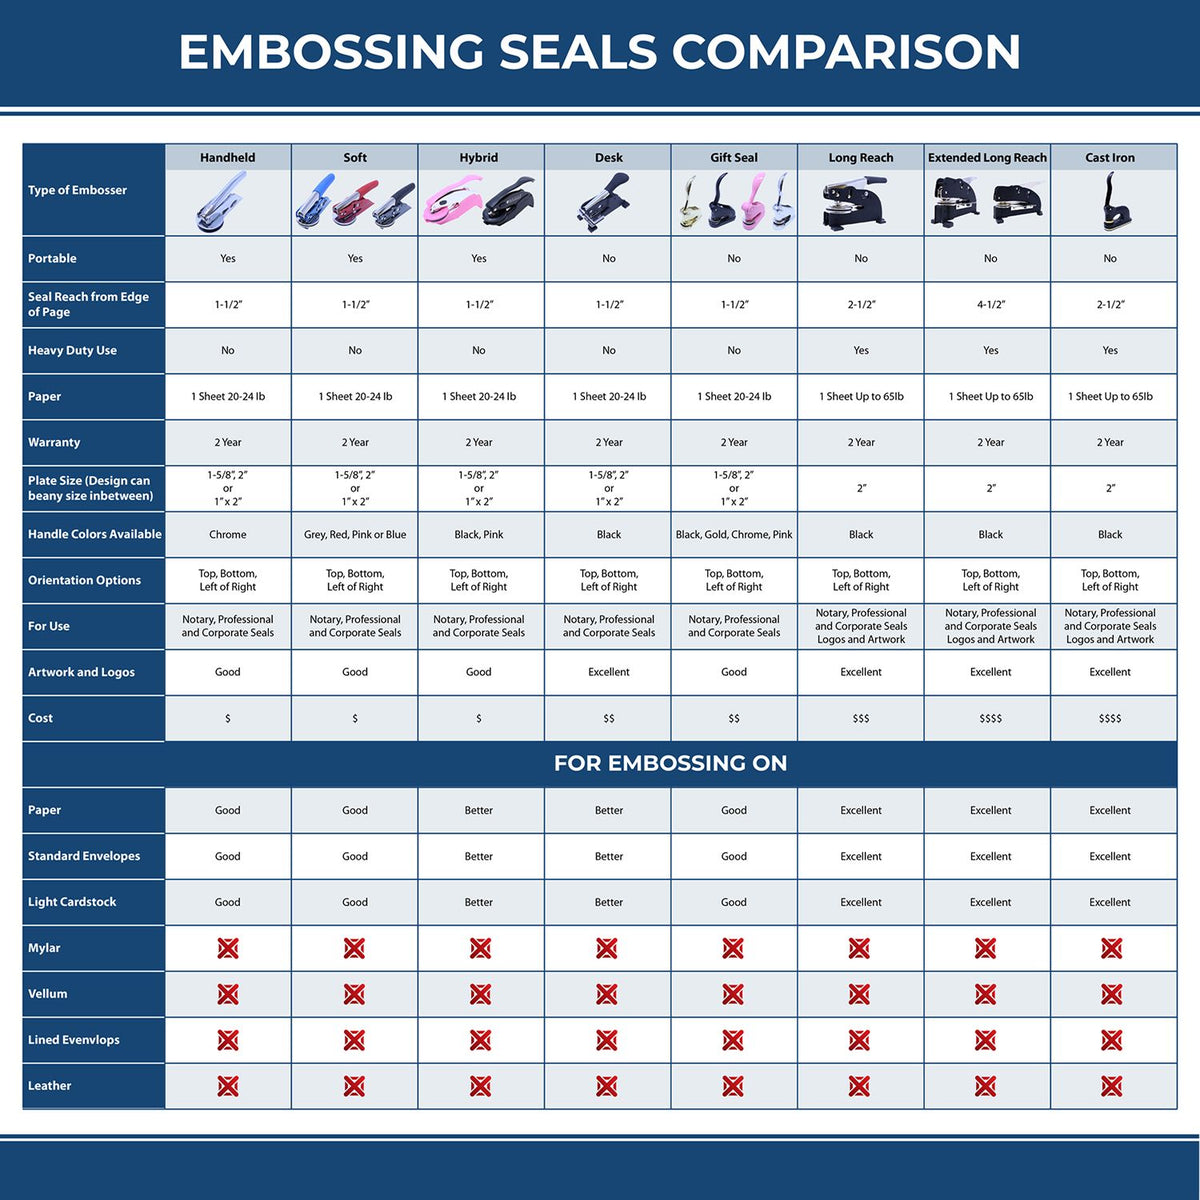 A comparison chart for the different types of mount models available for the Handheld New Jersey Architect Seal Embosser.